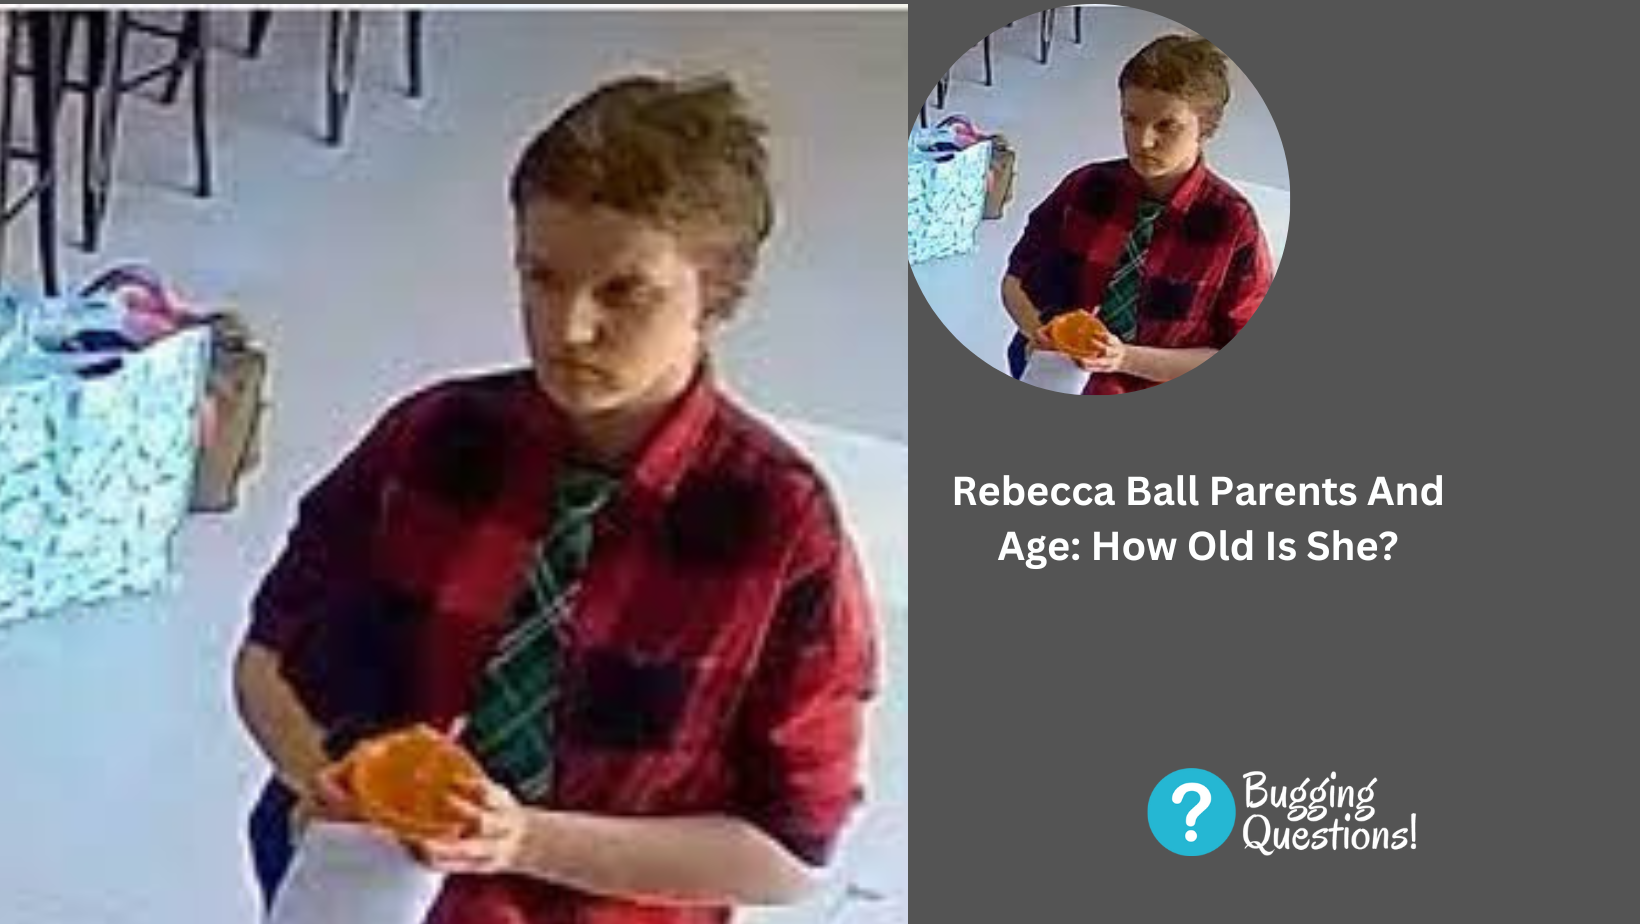 Rebecca Ball Parents And Age: How Old Is She?